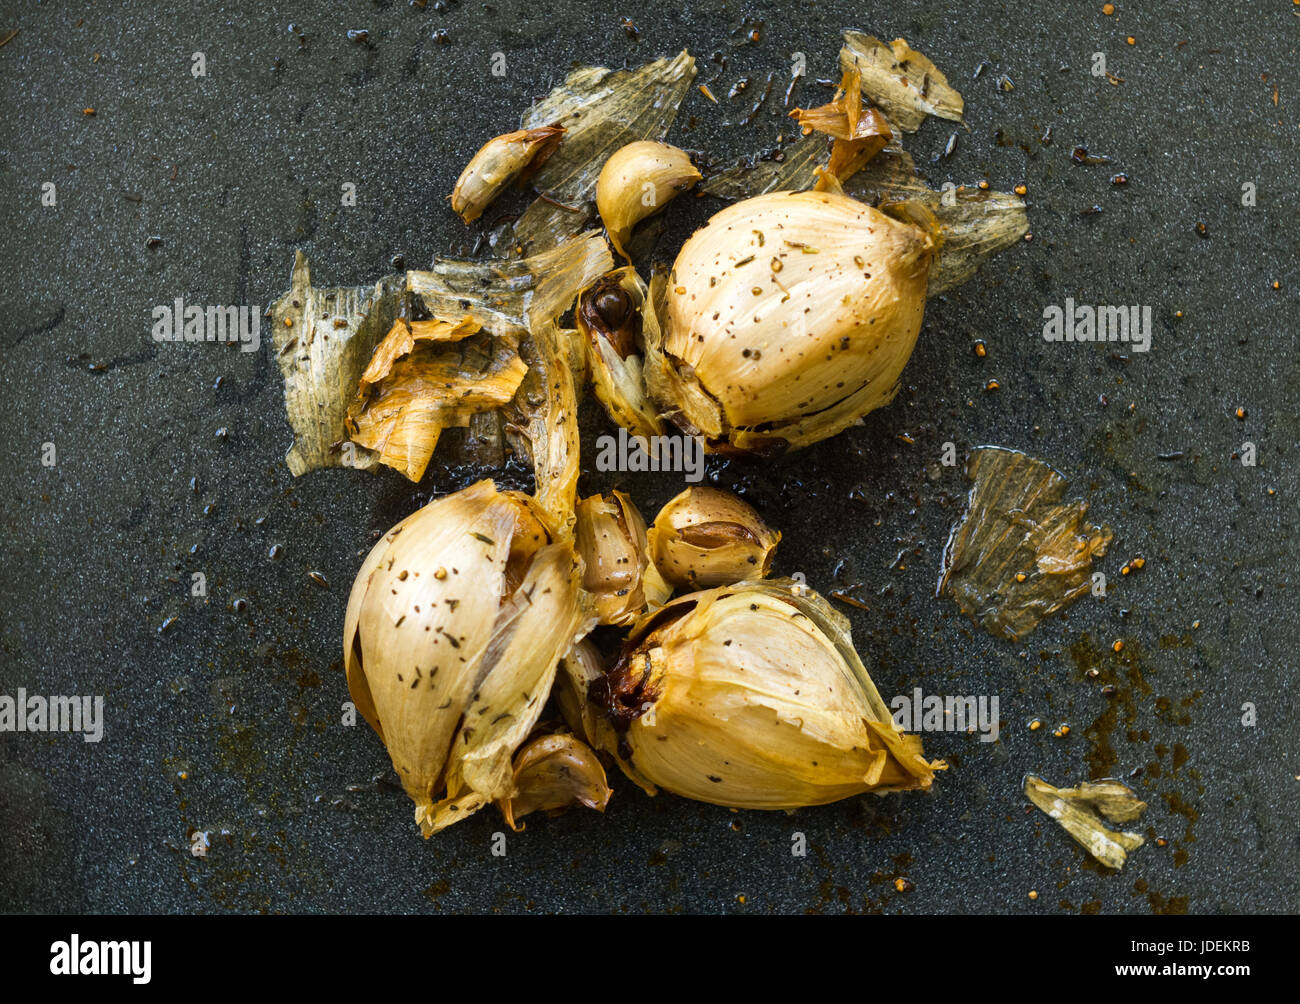 Caramelised roasted garlic fresh out of the oven on a steel blue tray sprinkled with dried rosemary and thyme Stock Photo